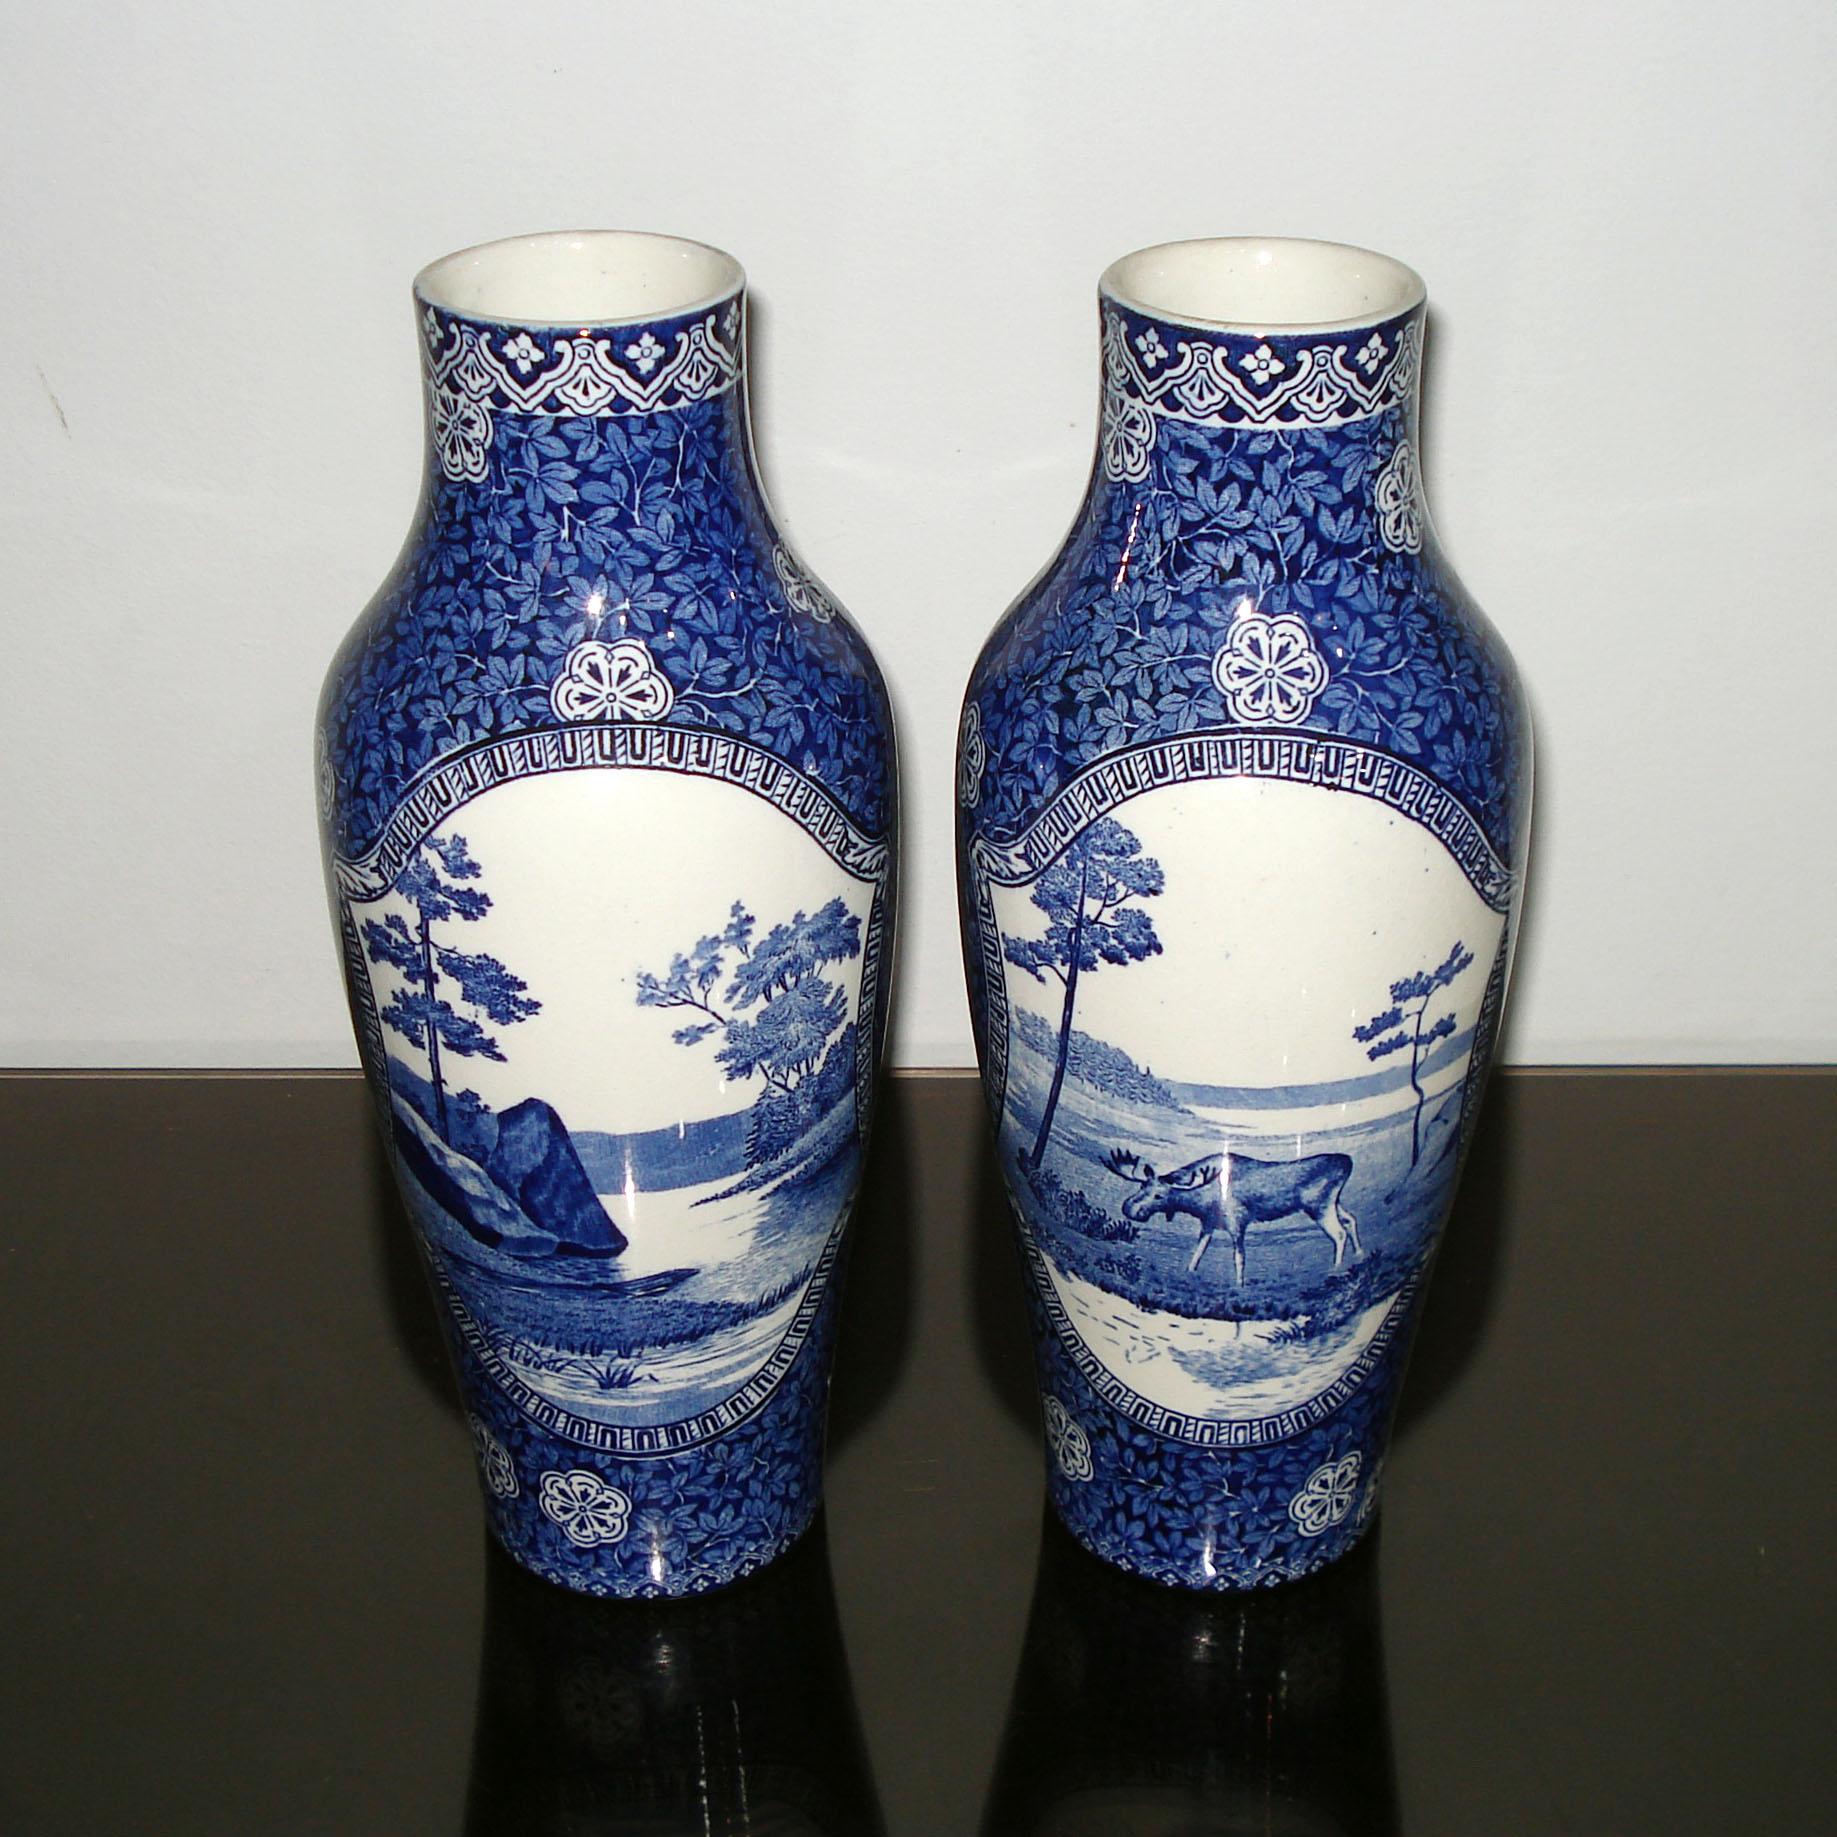 Beautiful and hard to find pair of tall Swedish Rörstrand blue white earthenware vases decorated with alternating medallions of bucolic scenes and floral arrangements on a blue leaf pattern. Each marked on the underside with a blue stamped Rörstrand